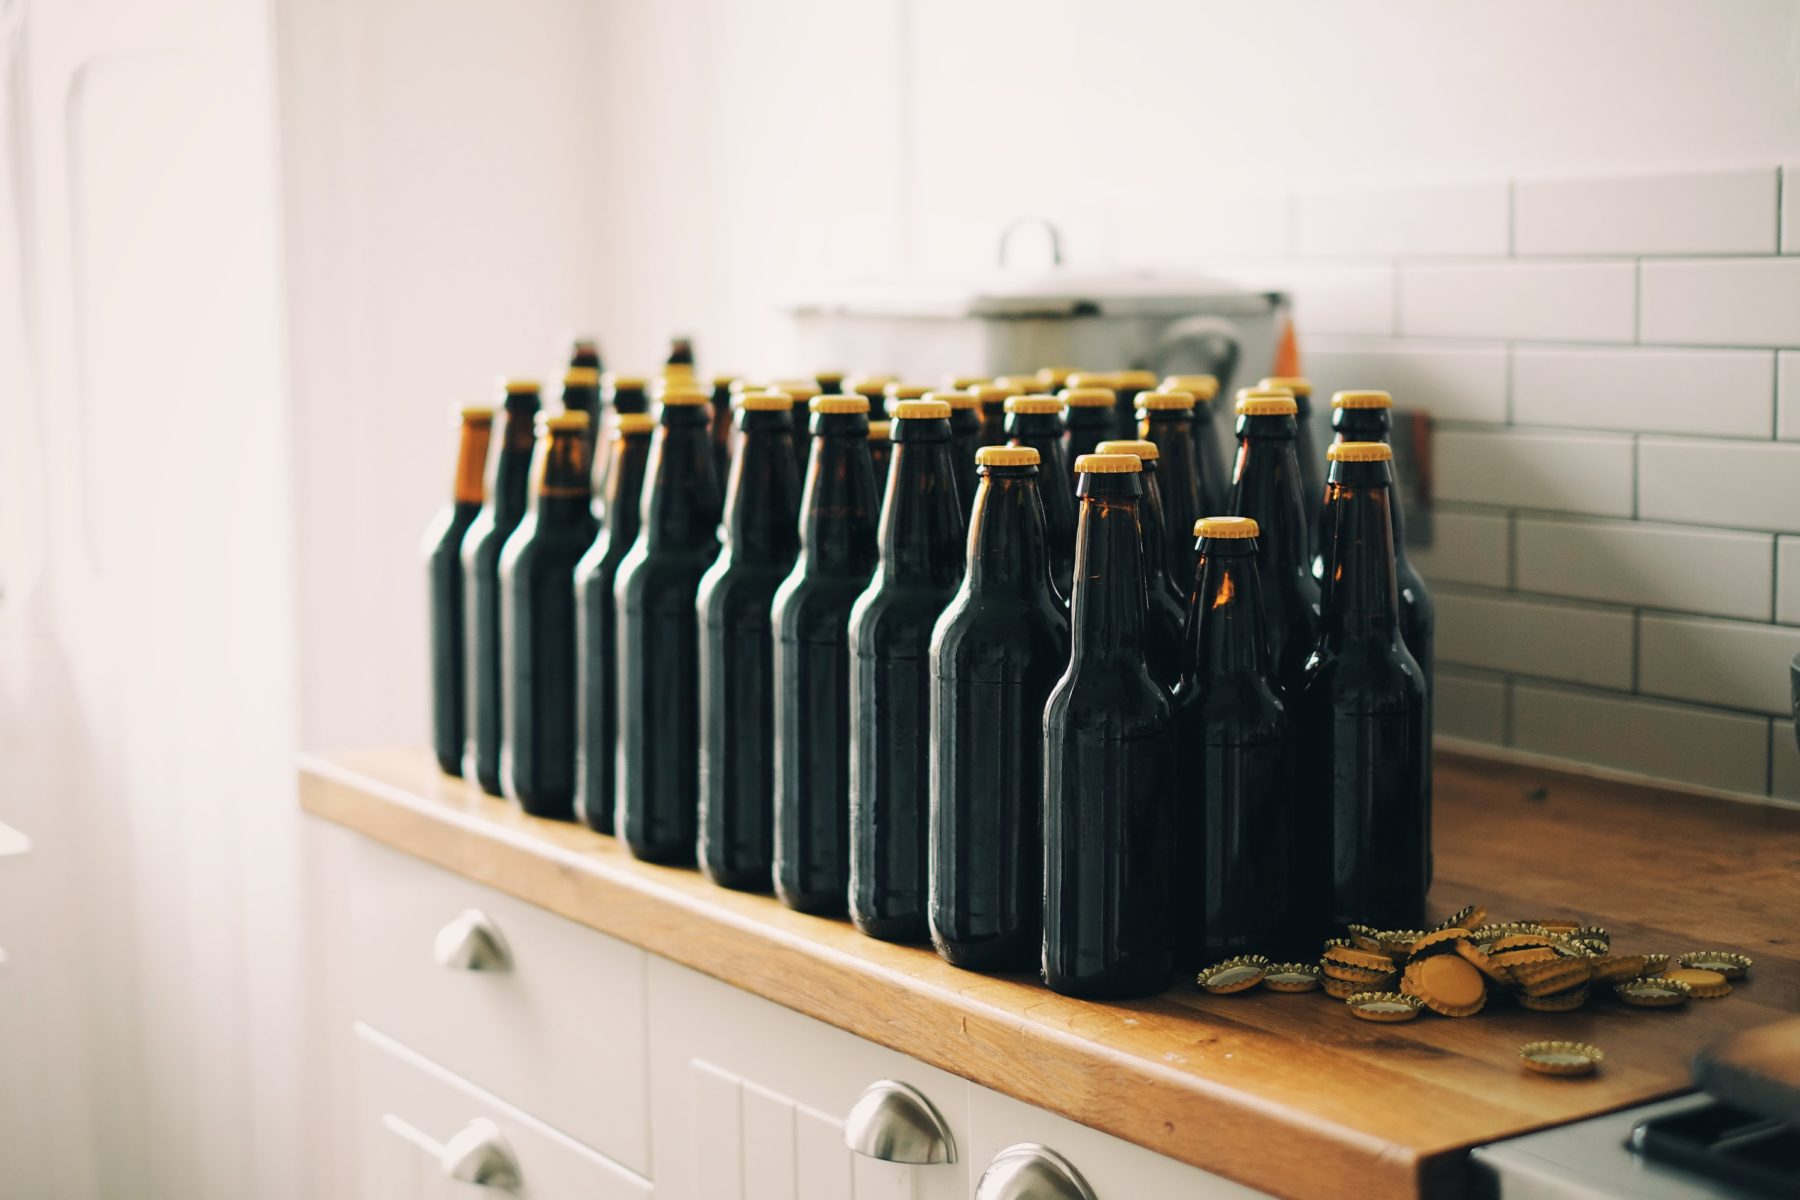 How to Bottle Homebrew